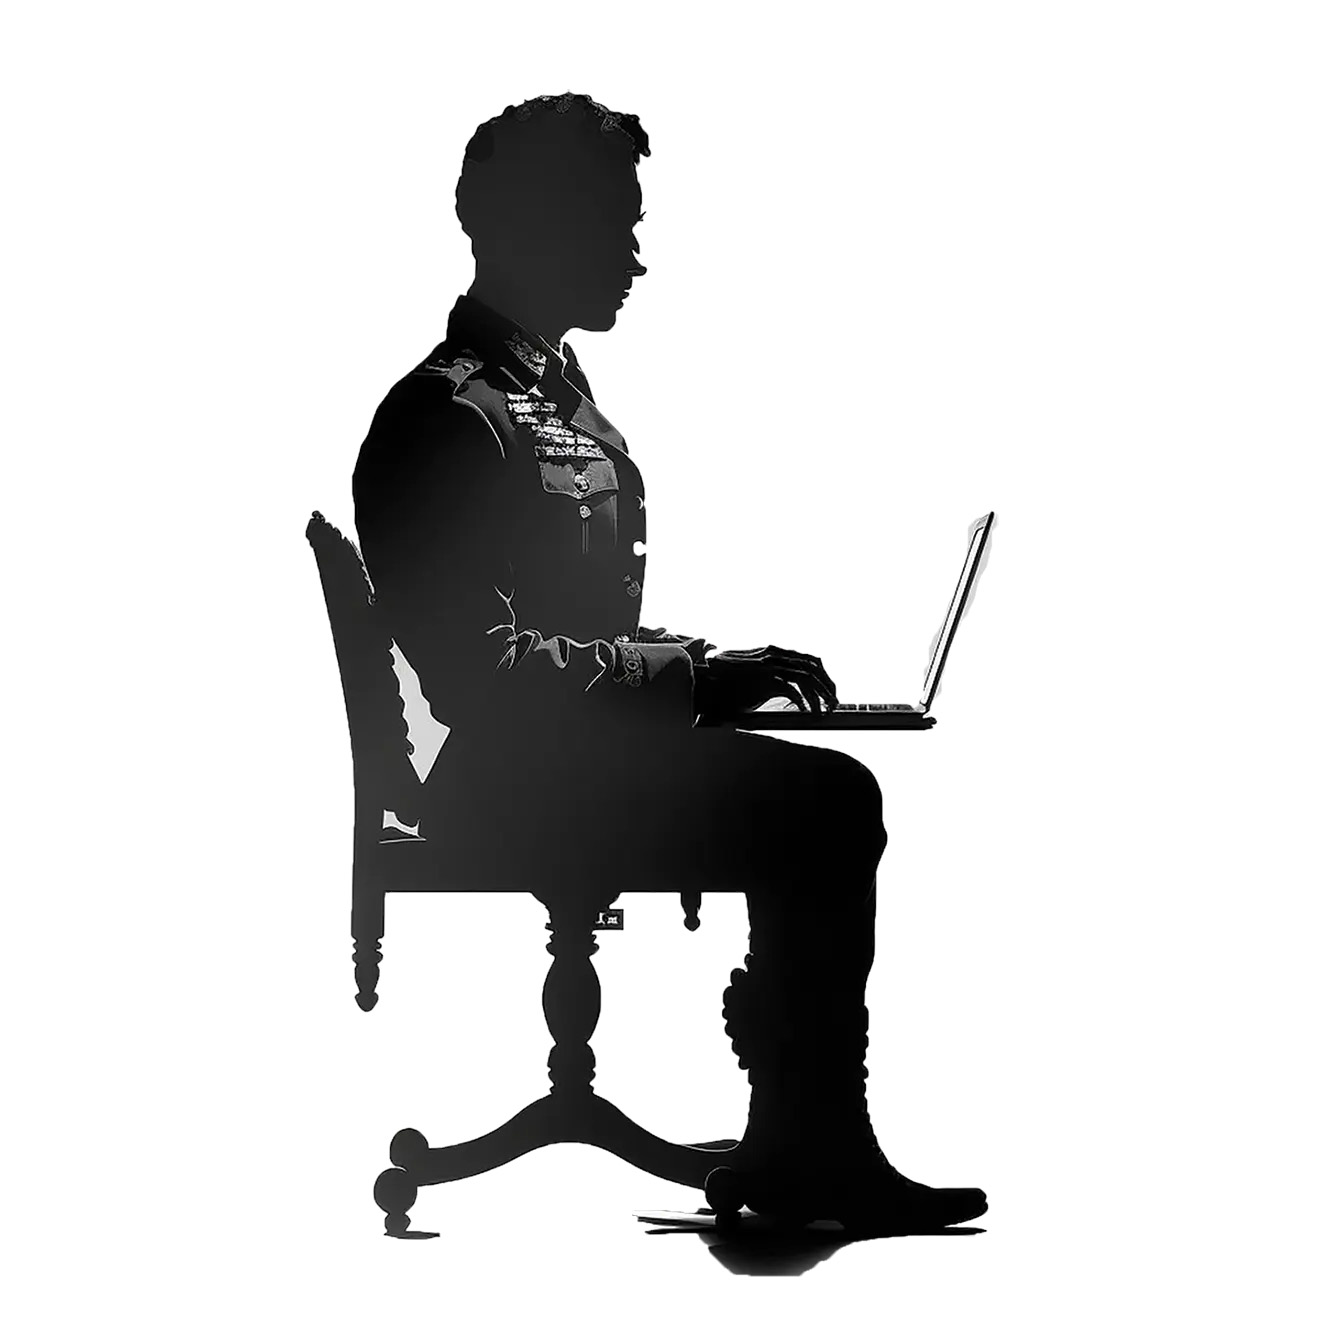 A silhouette of a Soldier sitting